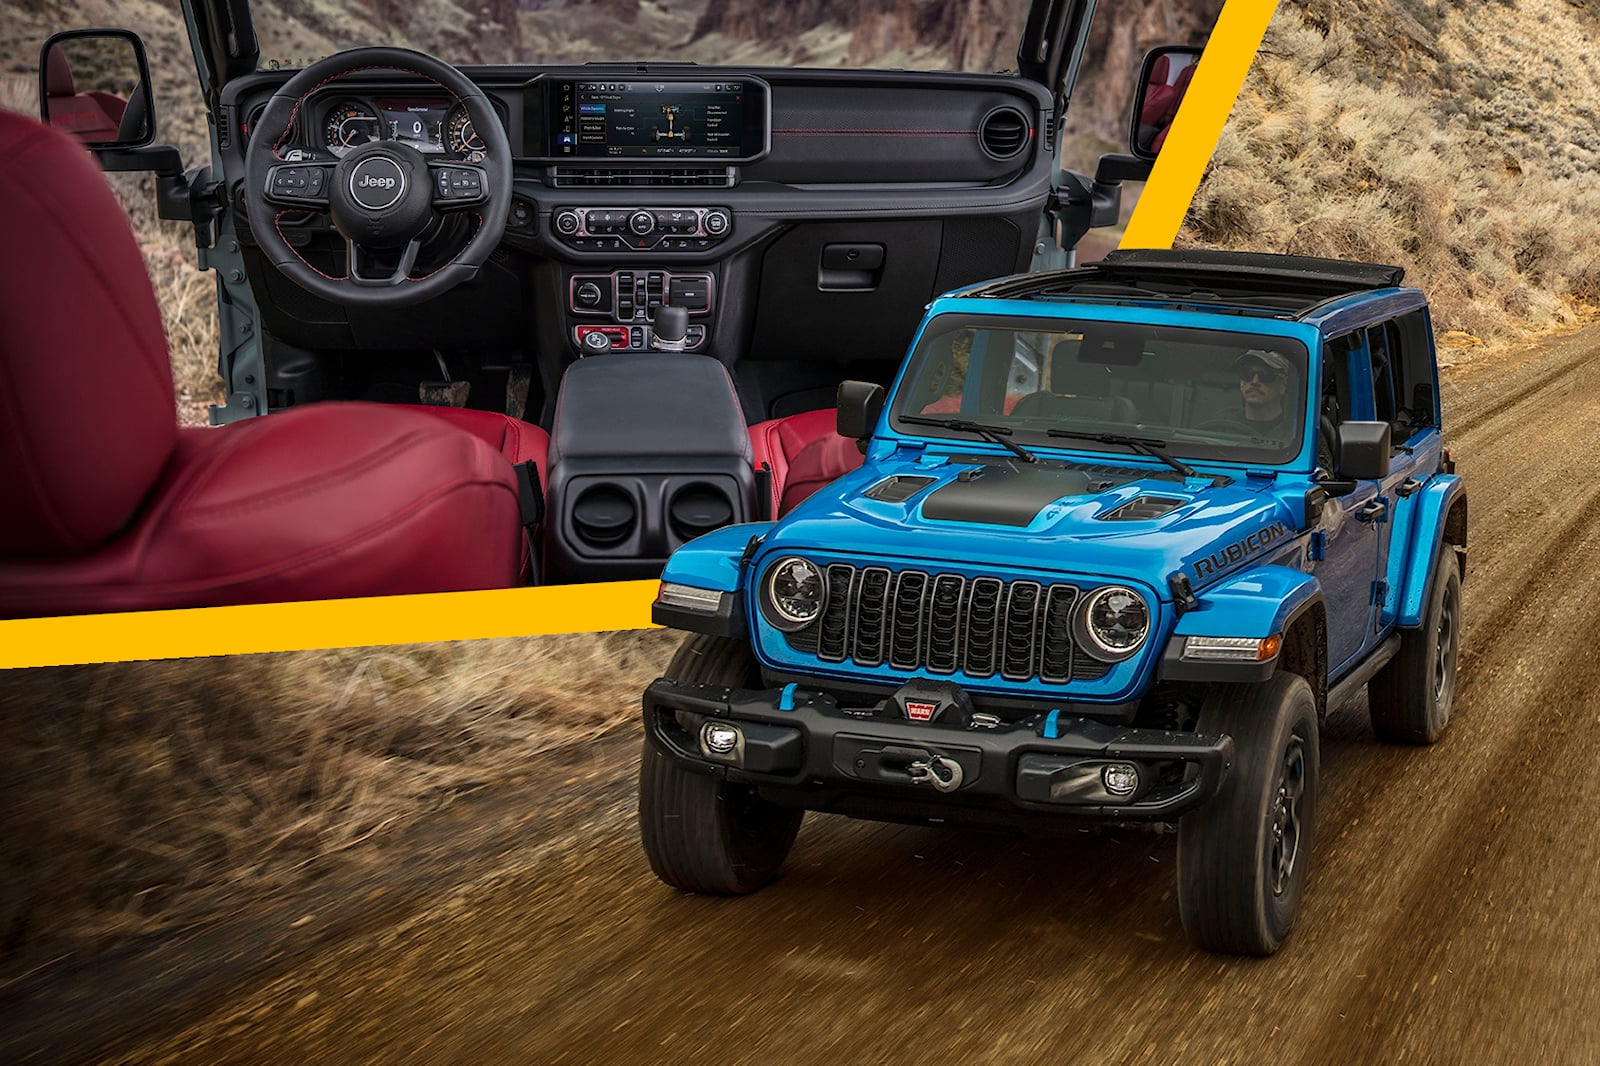 Jeep Wrangler Facelift Arrives With New Models And More Standard